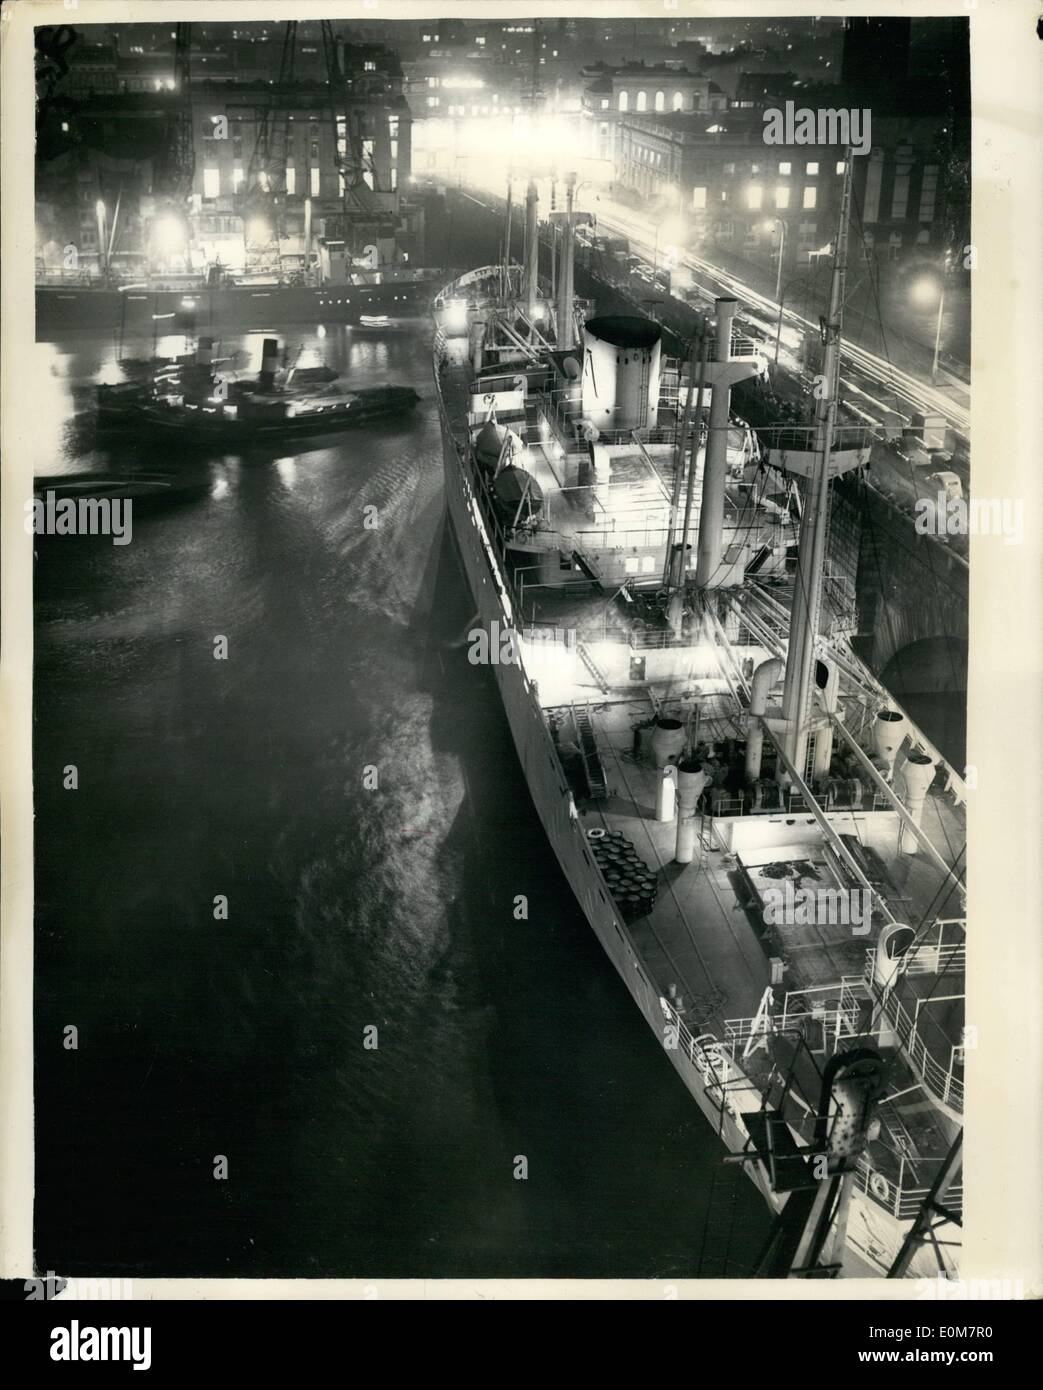 Jan. 01, 1954 - Spanish Cargo Vessel Rams London Bridge: Thousands of homeward bound City workers stopped on their way home this evening to each efforts to refloat the 487 feet Spanish cargo vessel ''Monte Uriquiola'' (7,723-tons) which jammed one of the South Bank buttresses of London Bridge as she was staring out on a 14 days round cruise to the Canary Islands. The ship was preparing to leave her berth and had cast off when the wind and the incoming tide slowed her round and brought her broadside against the bridge Stock Photo